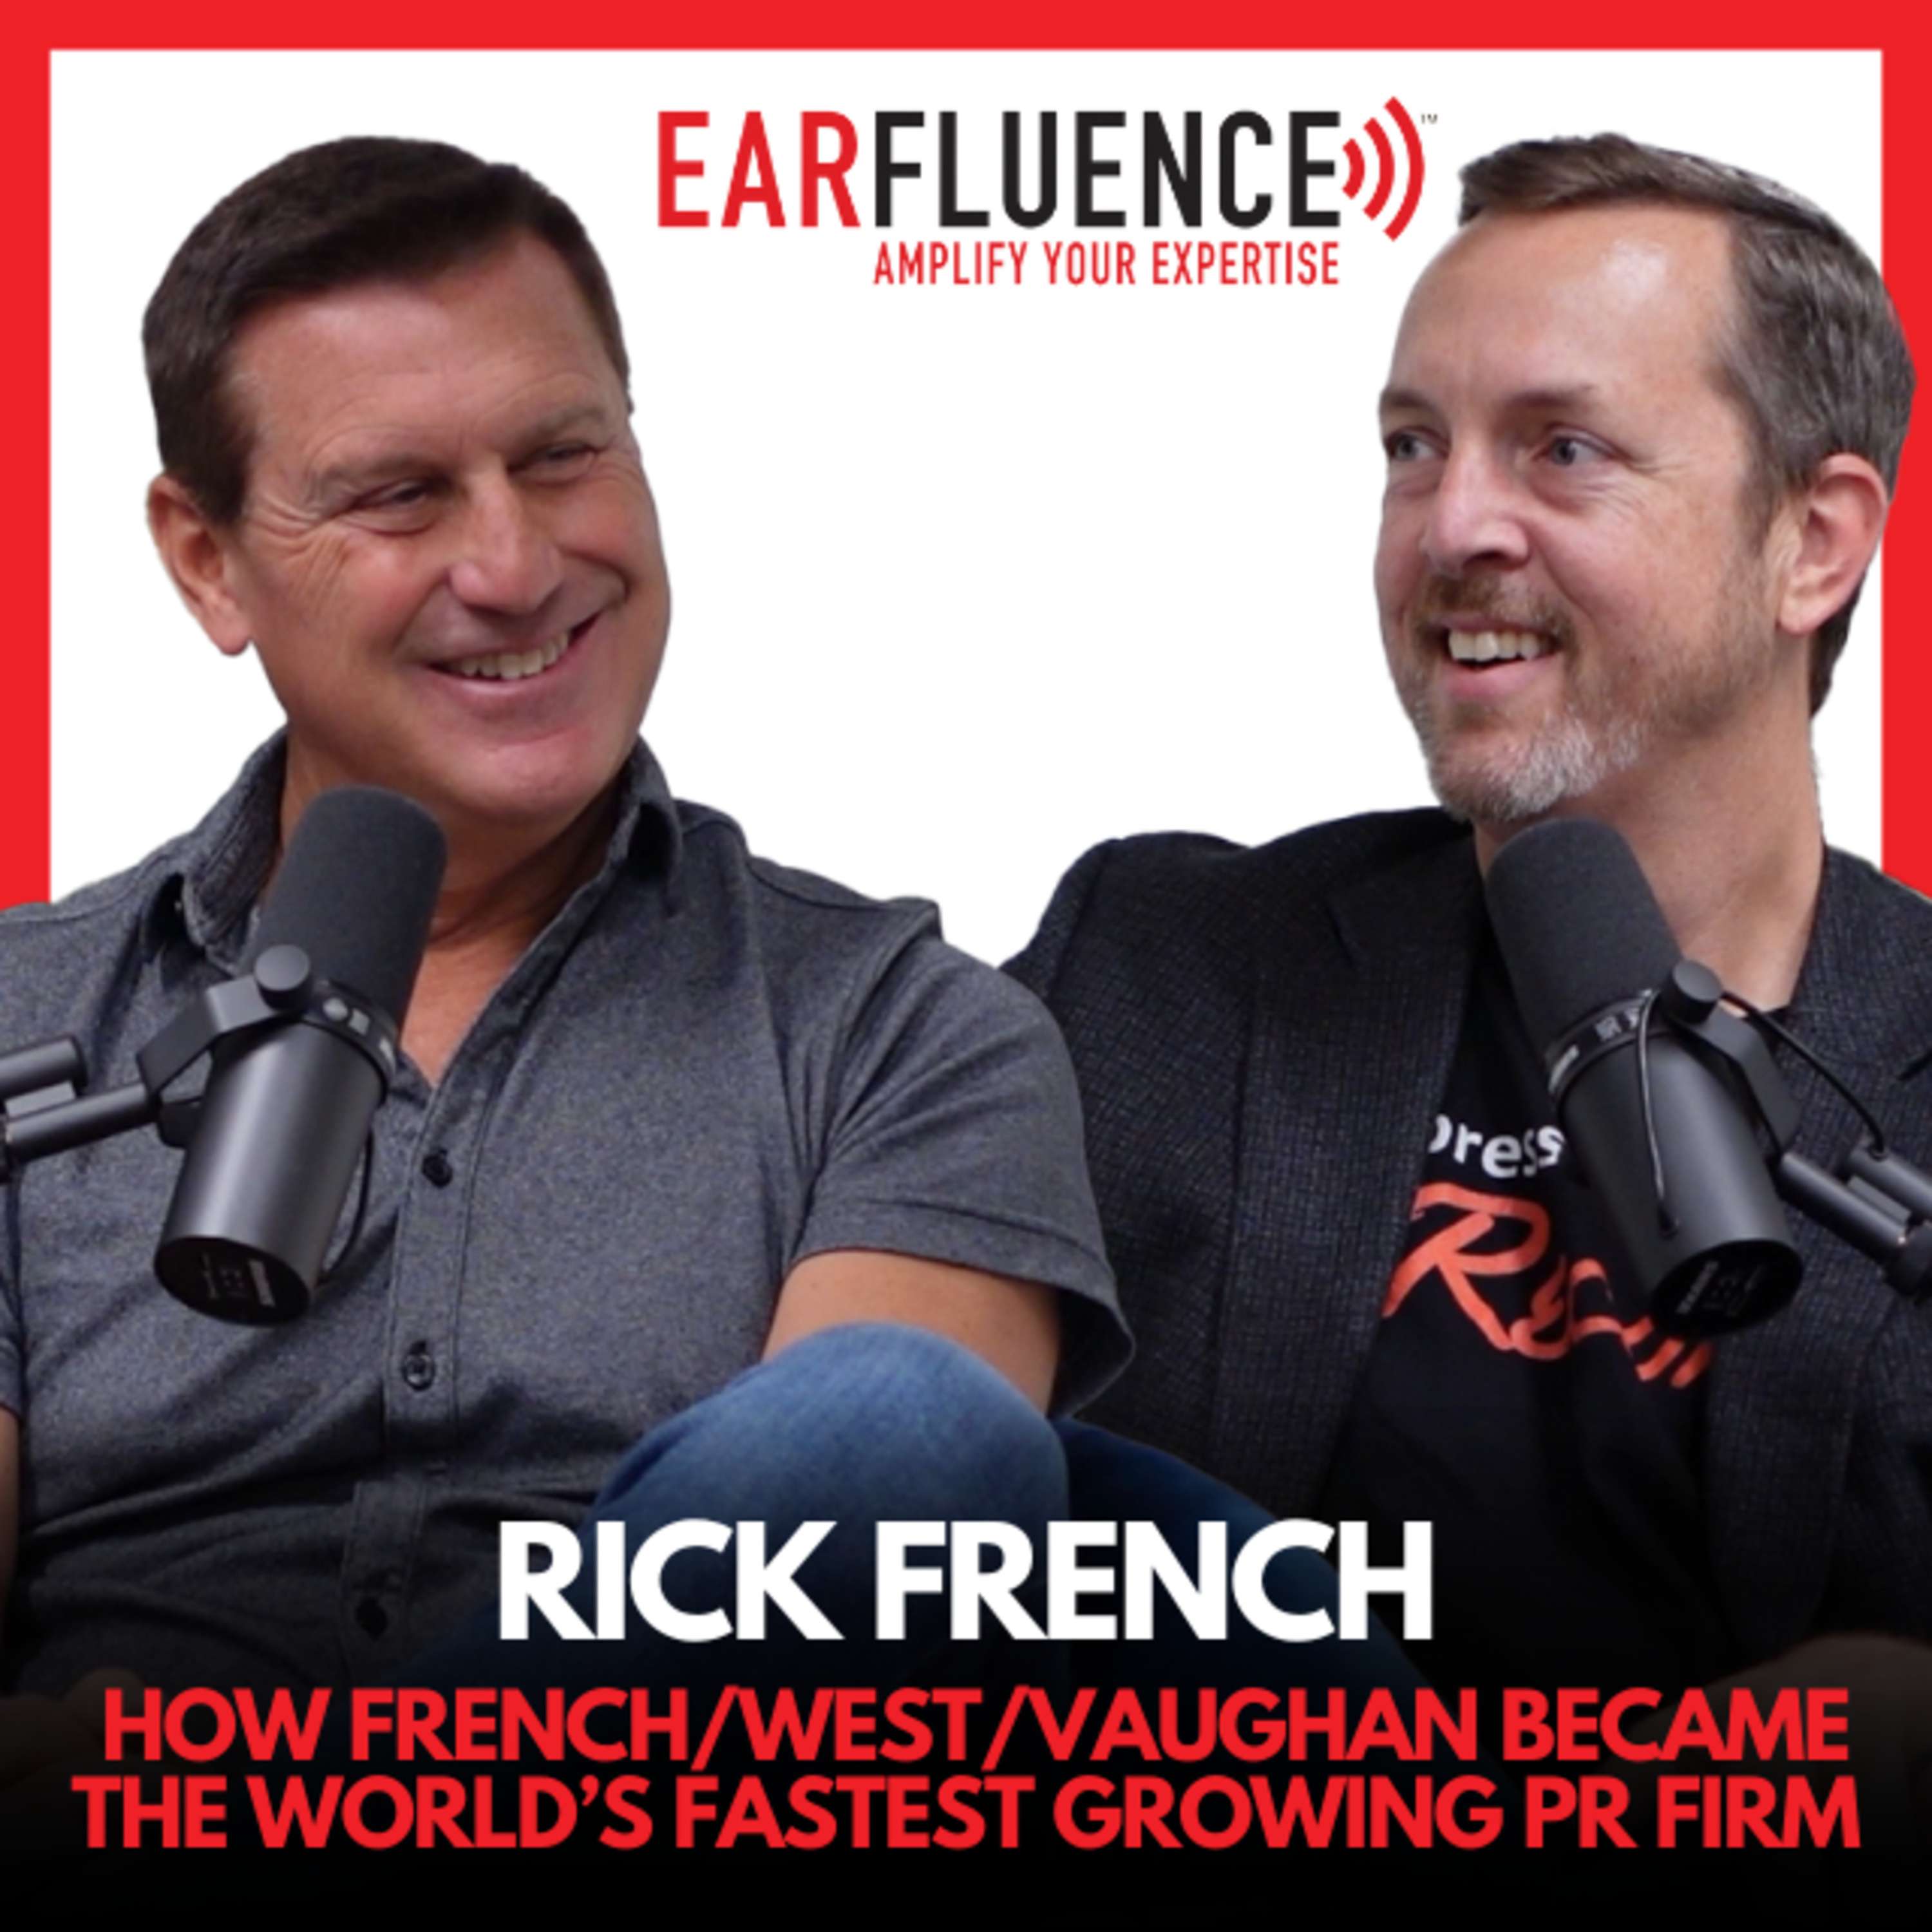 How French/West/Vaughan Became the World's Fastest Growing PR Firm